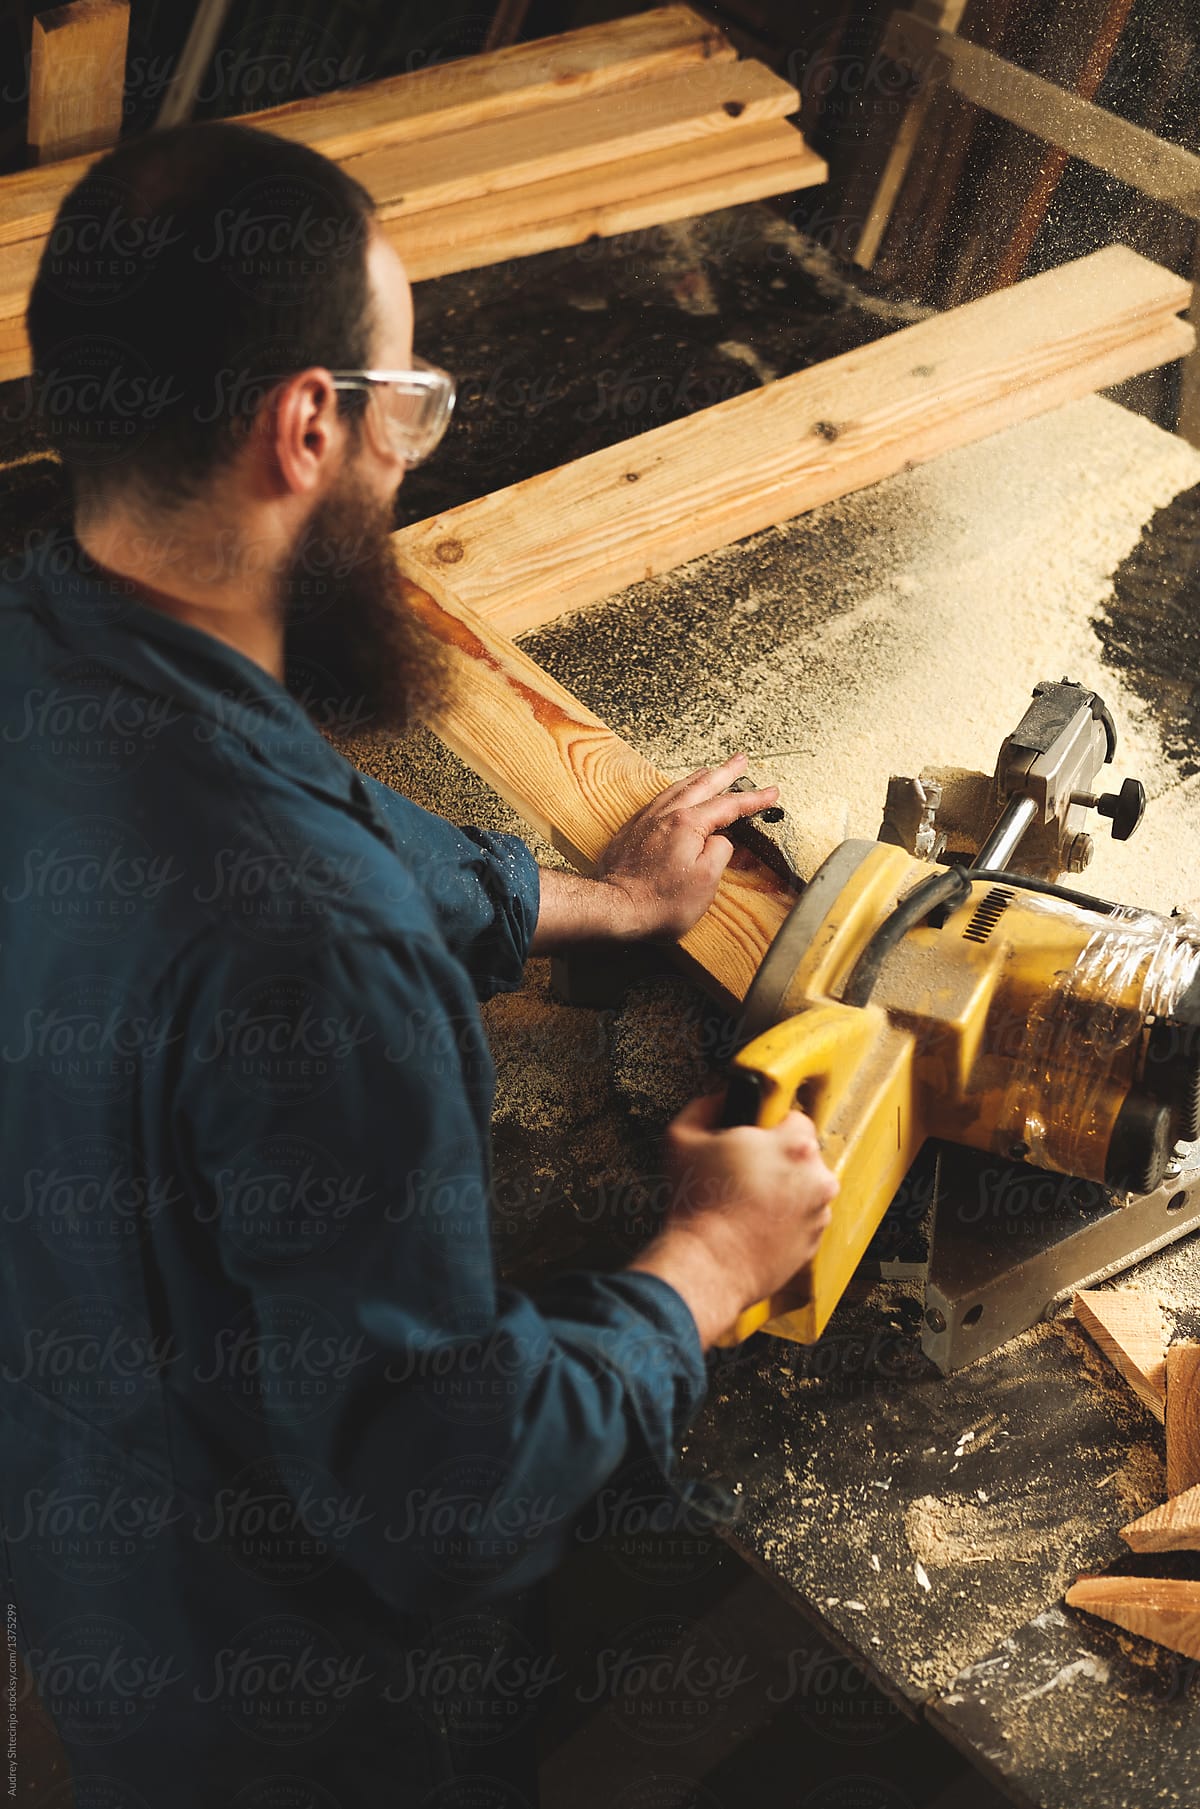 Carpenters working in workshop/sawmil with wood on circular saw.